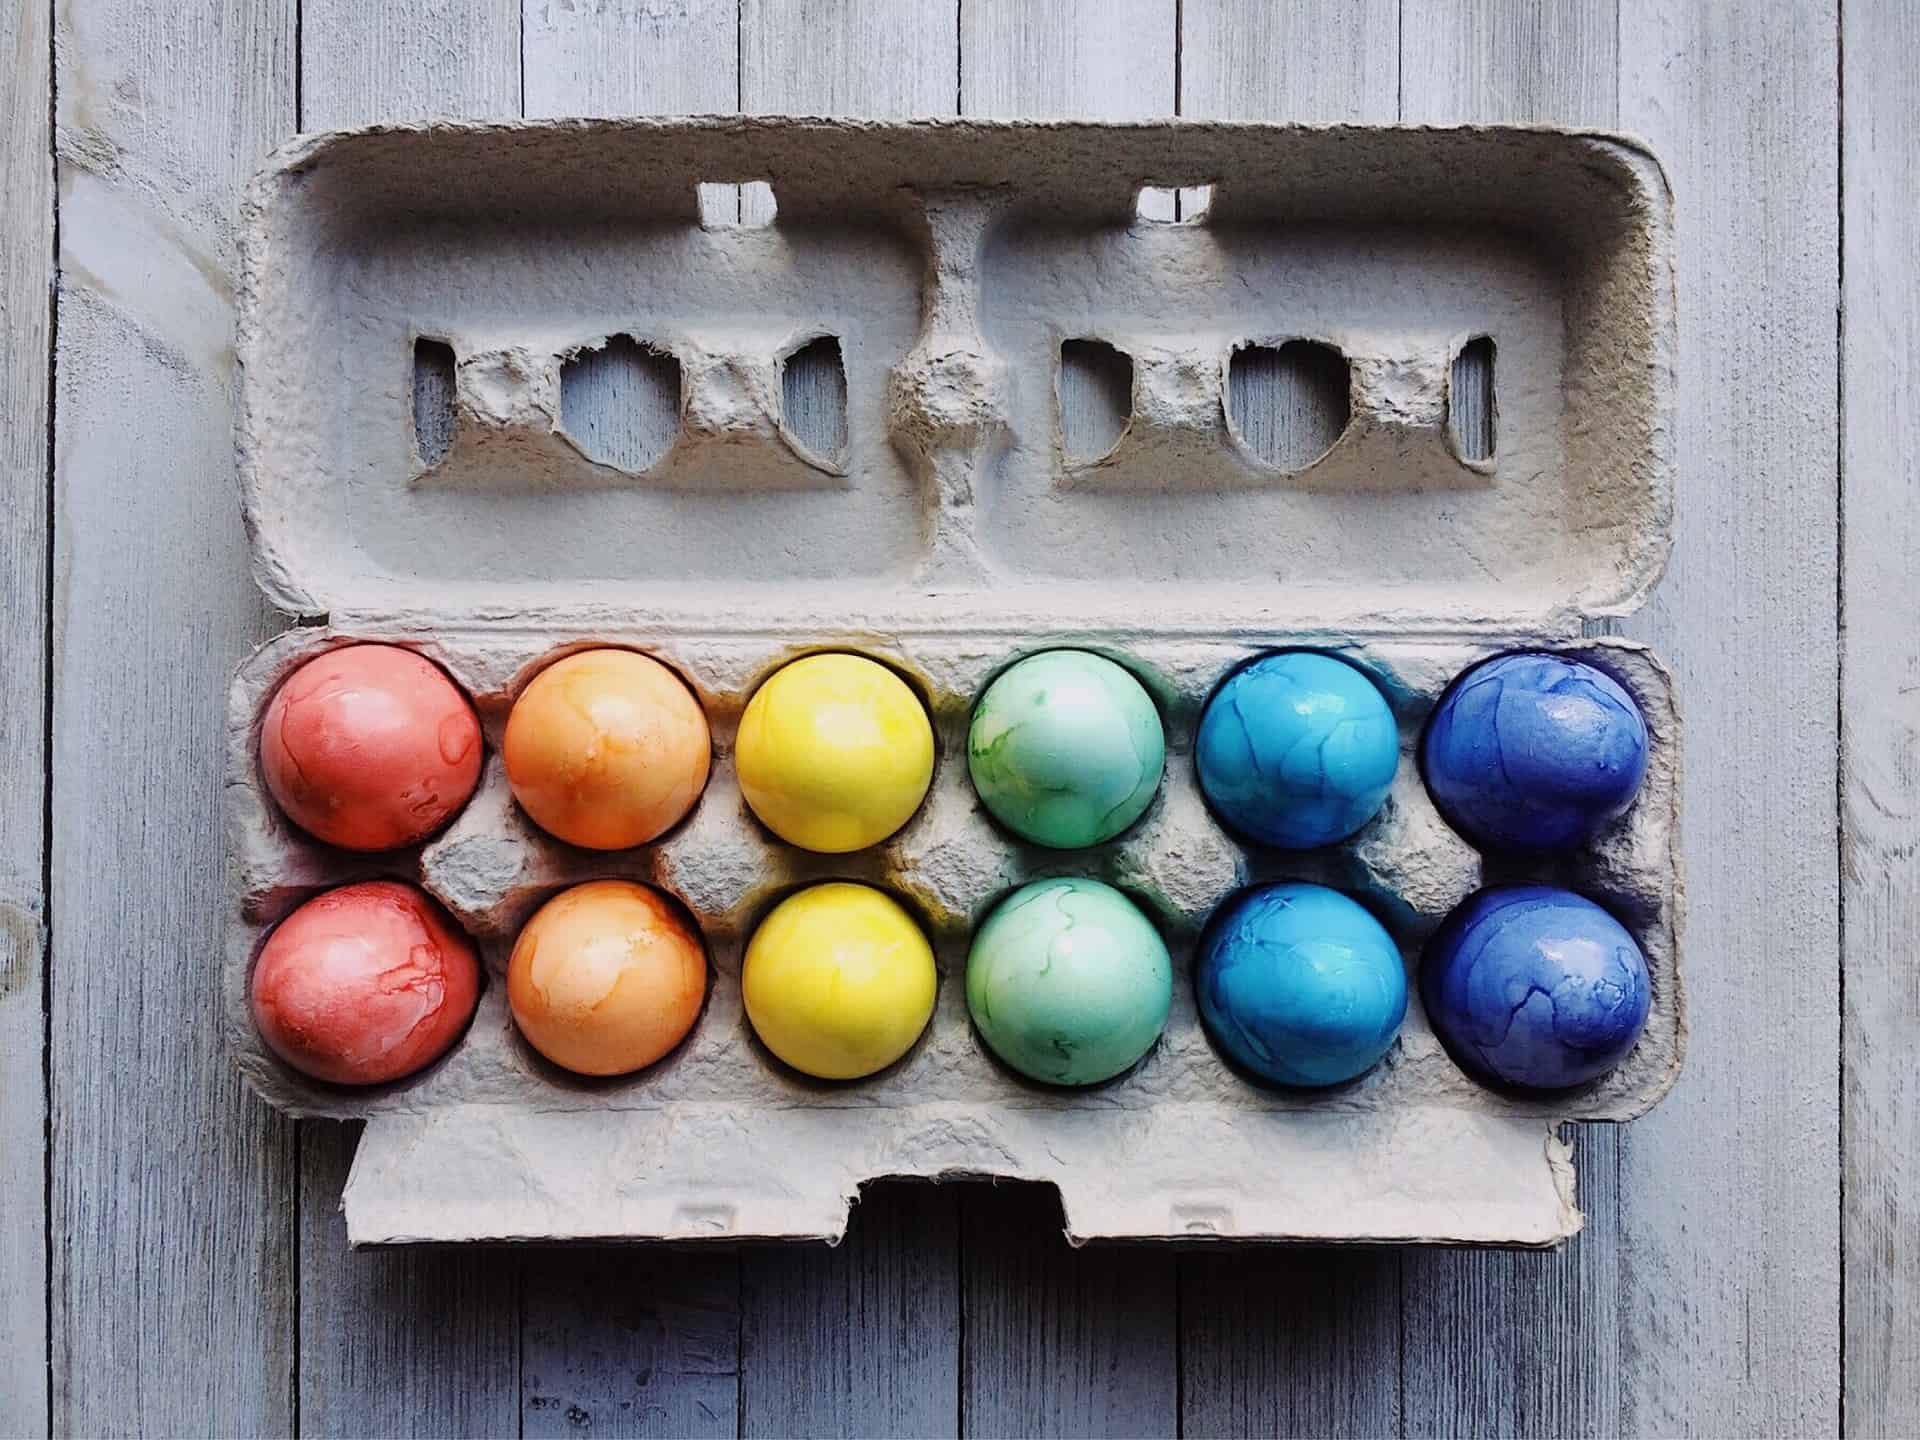 A dozen colorful Easter eggs in an egg container.